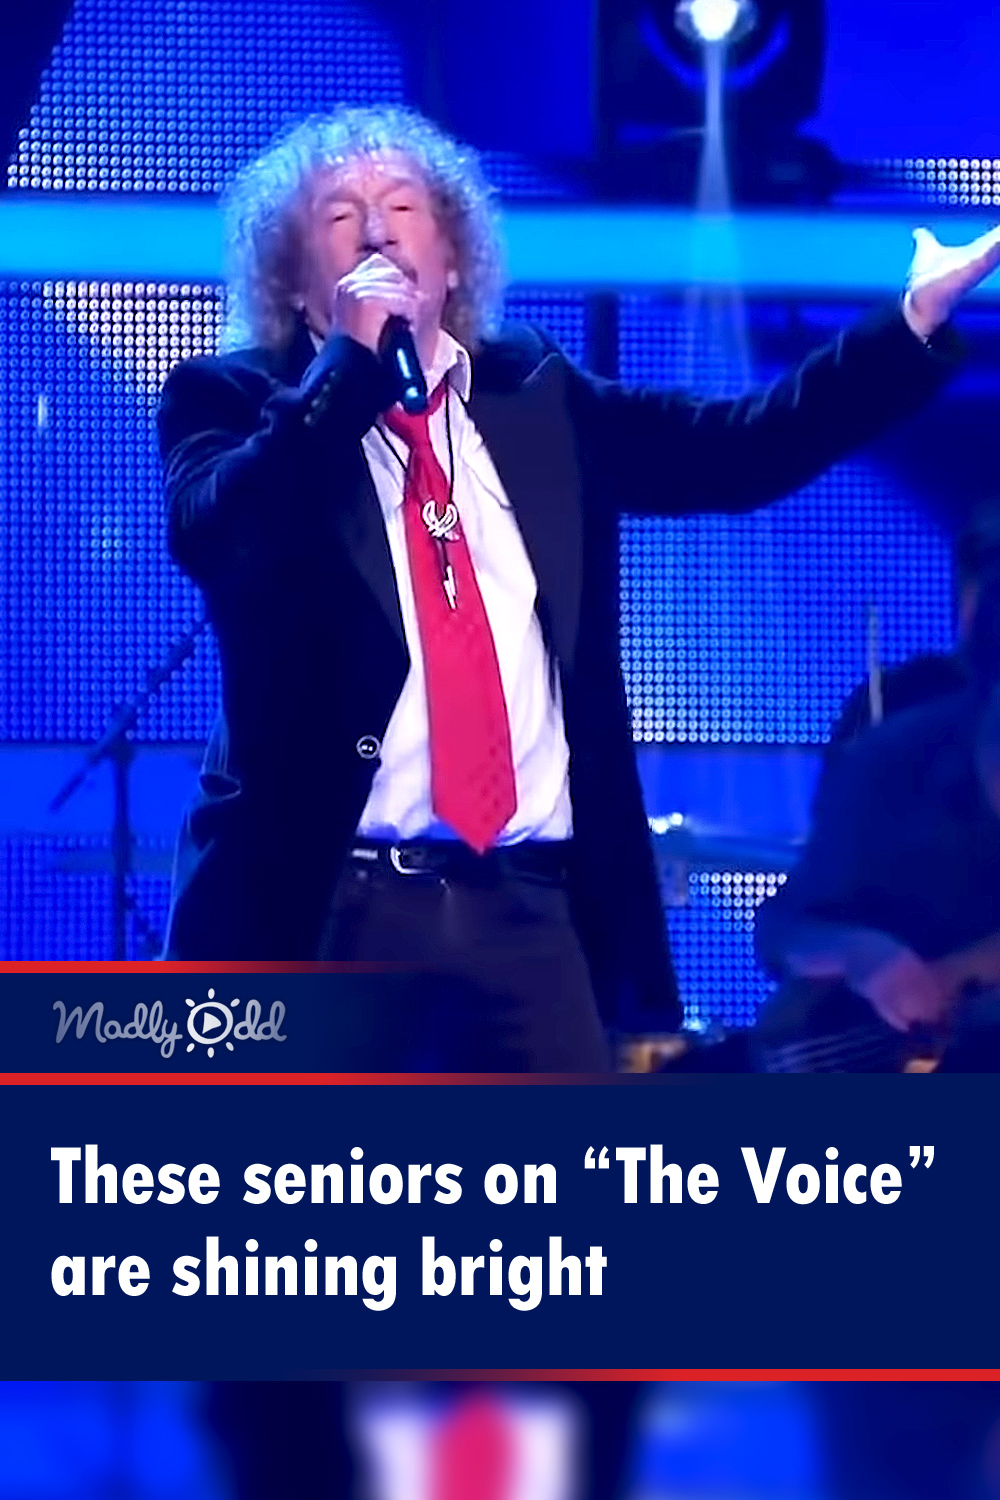 These seniors on The Voice are shining bright